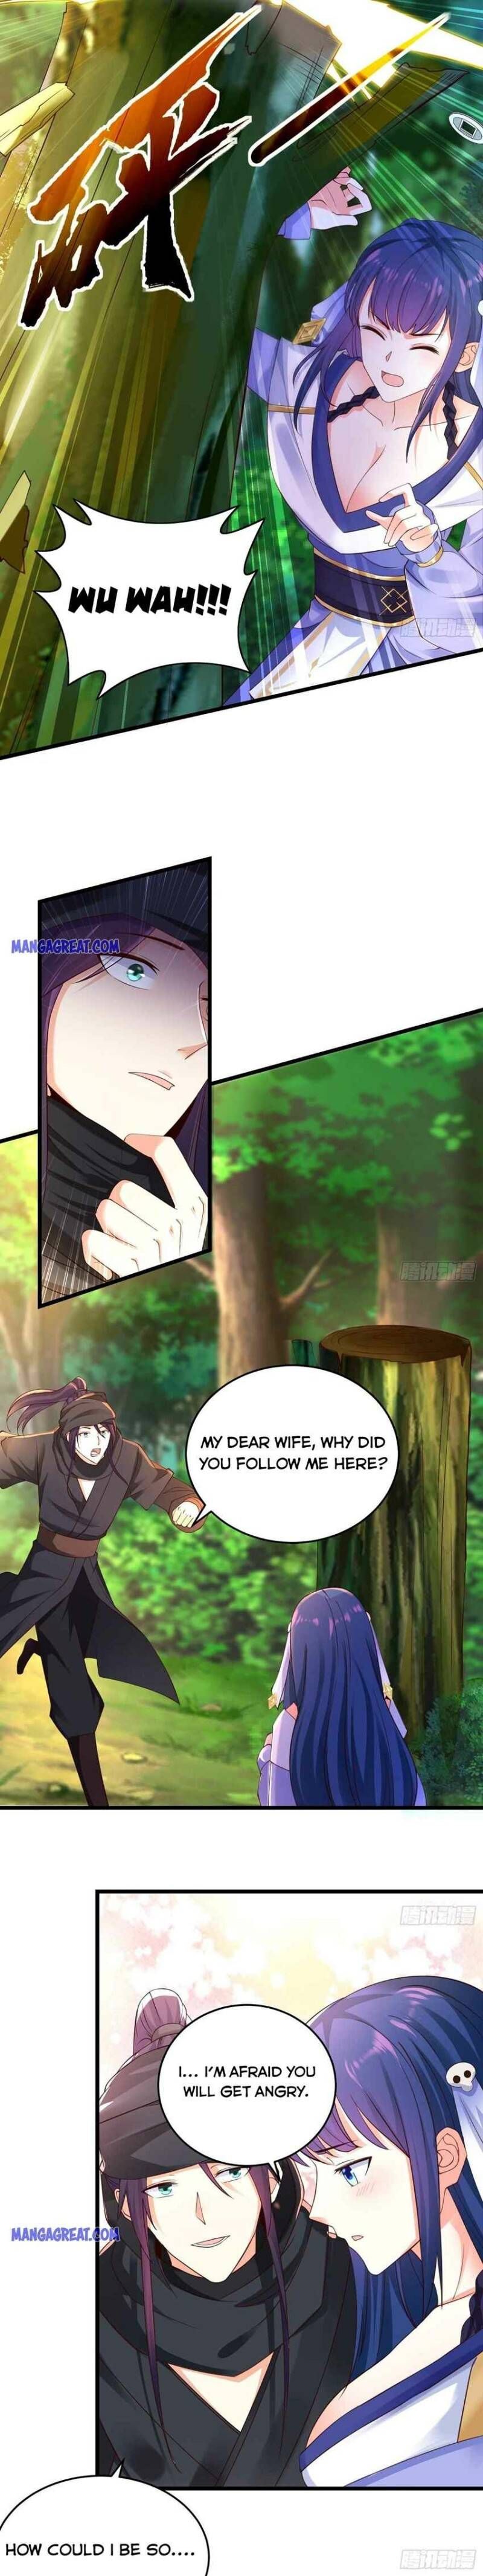 Forced to Become the Villain's Son-in-law Chapter 274 page 7